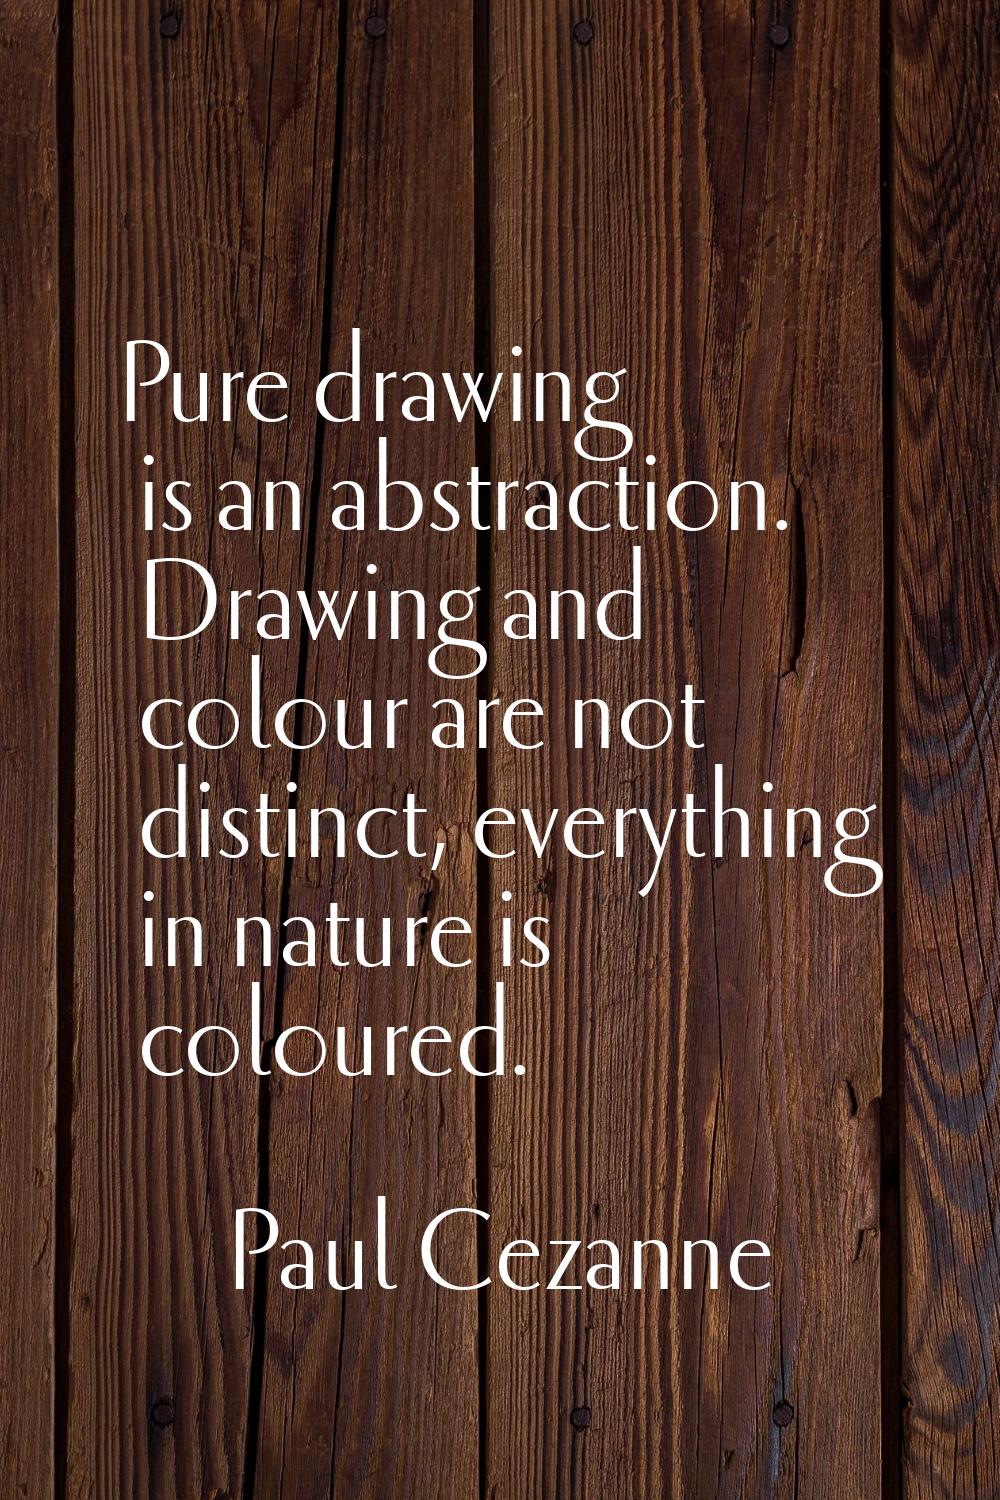 Pure drawing is an abstraction. Drawing and colour are not distinct, everything in nature is colour